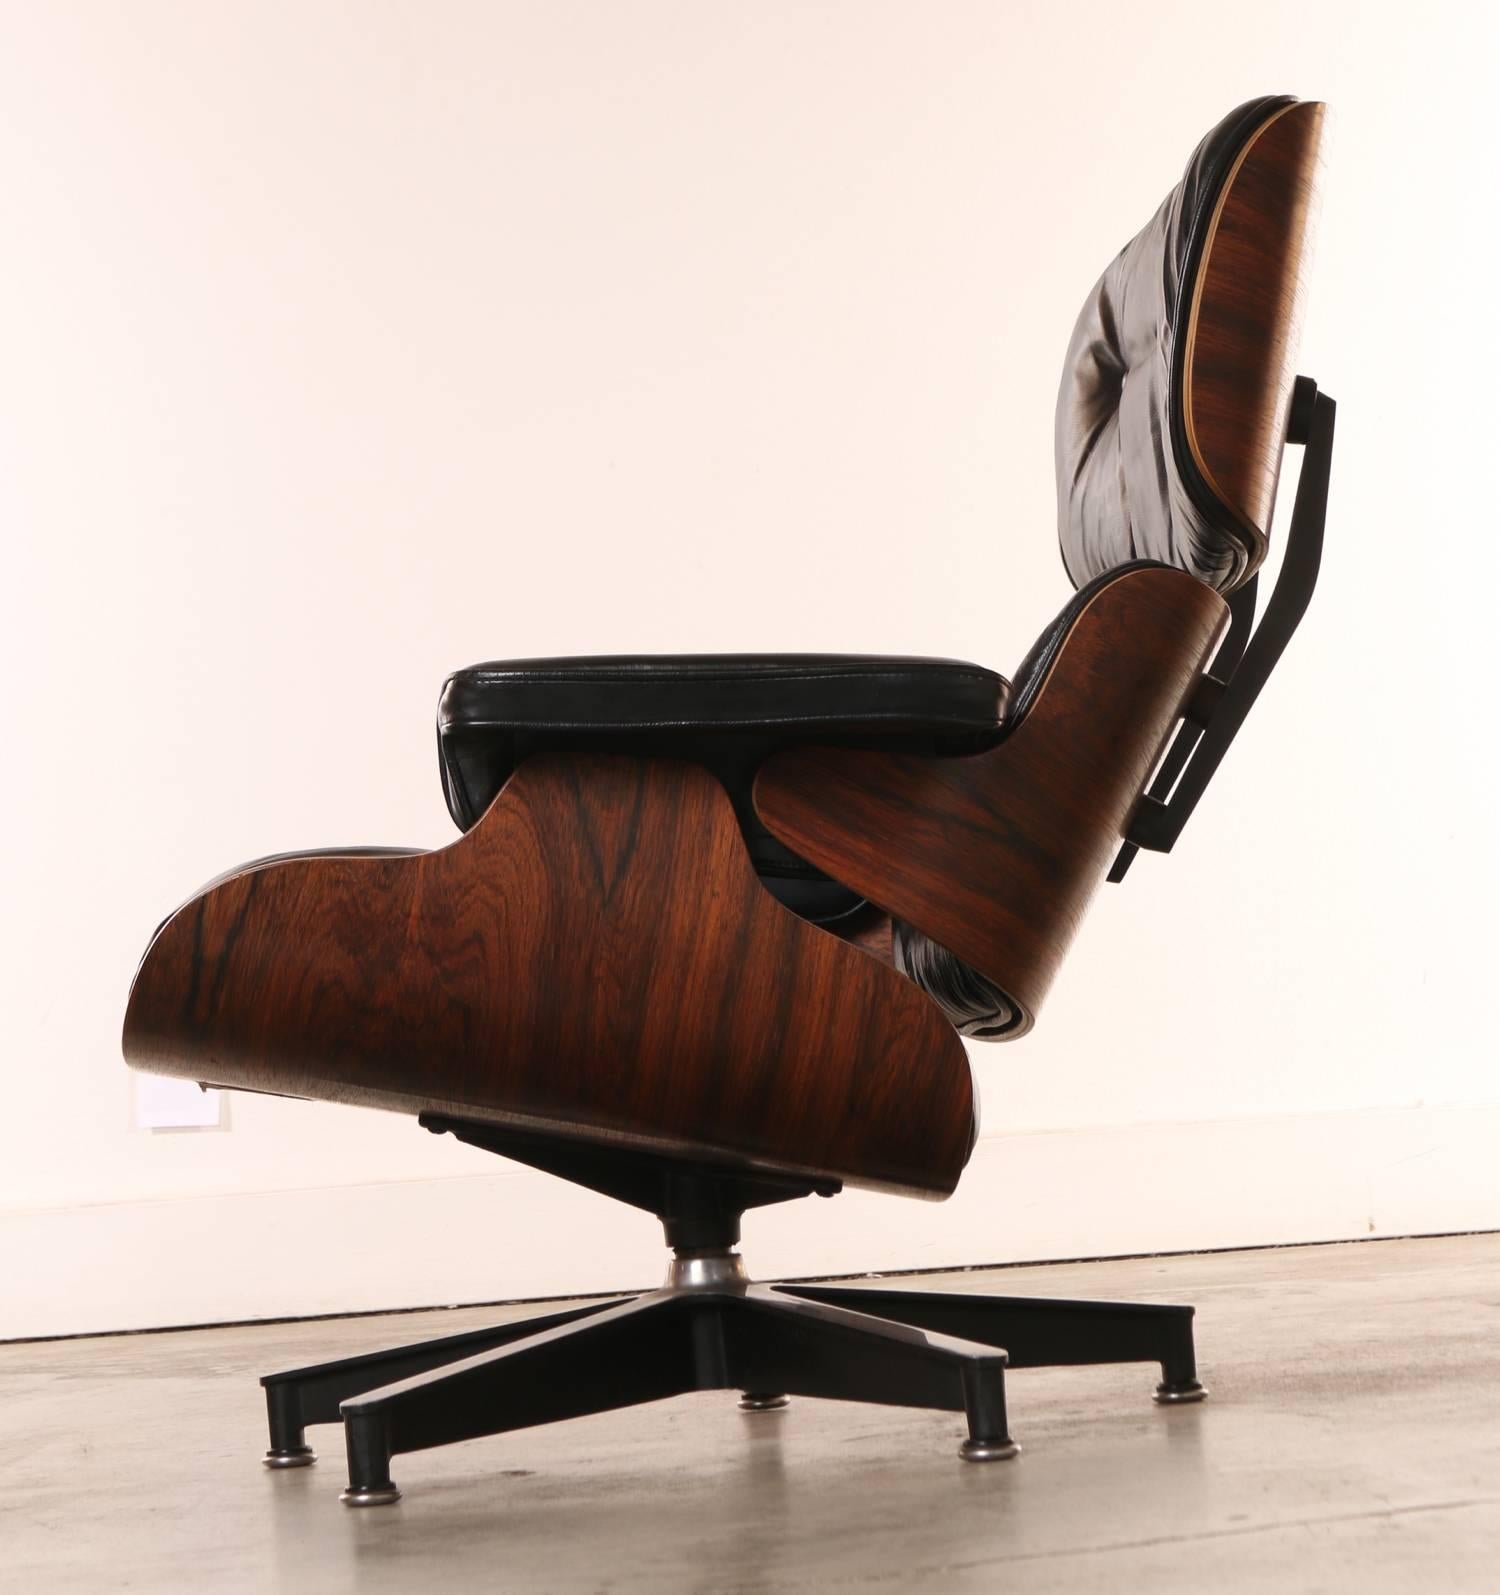 Molded Eames Rosewood Lounge Chair and Ottoman, Historically Important Venice CA 1960s